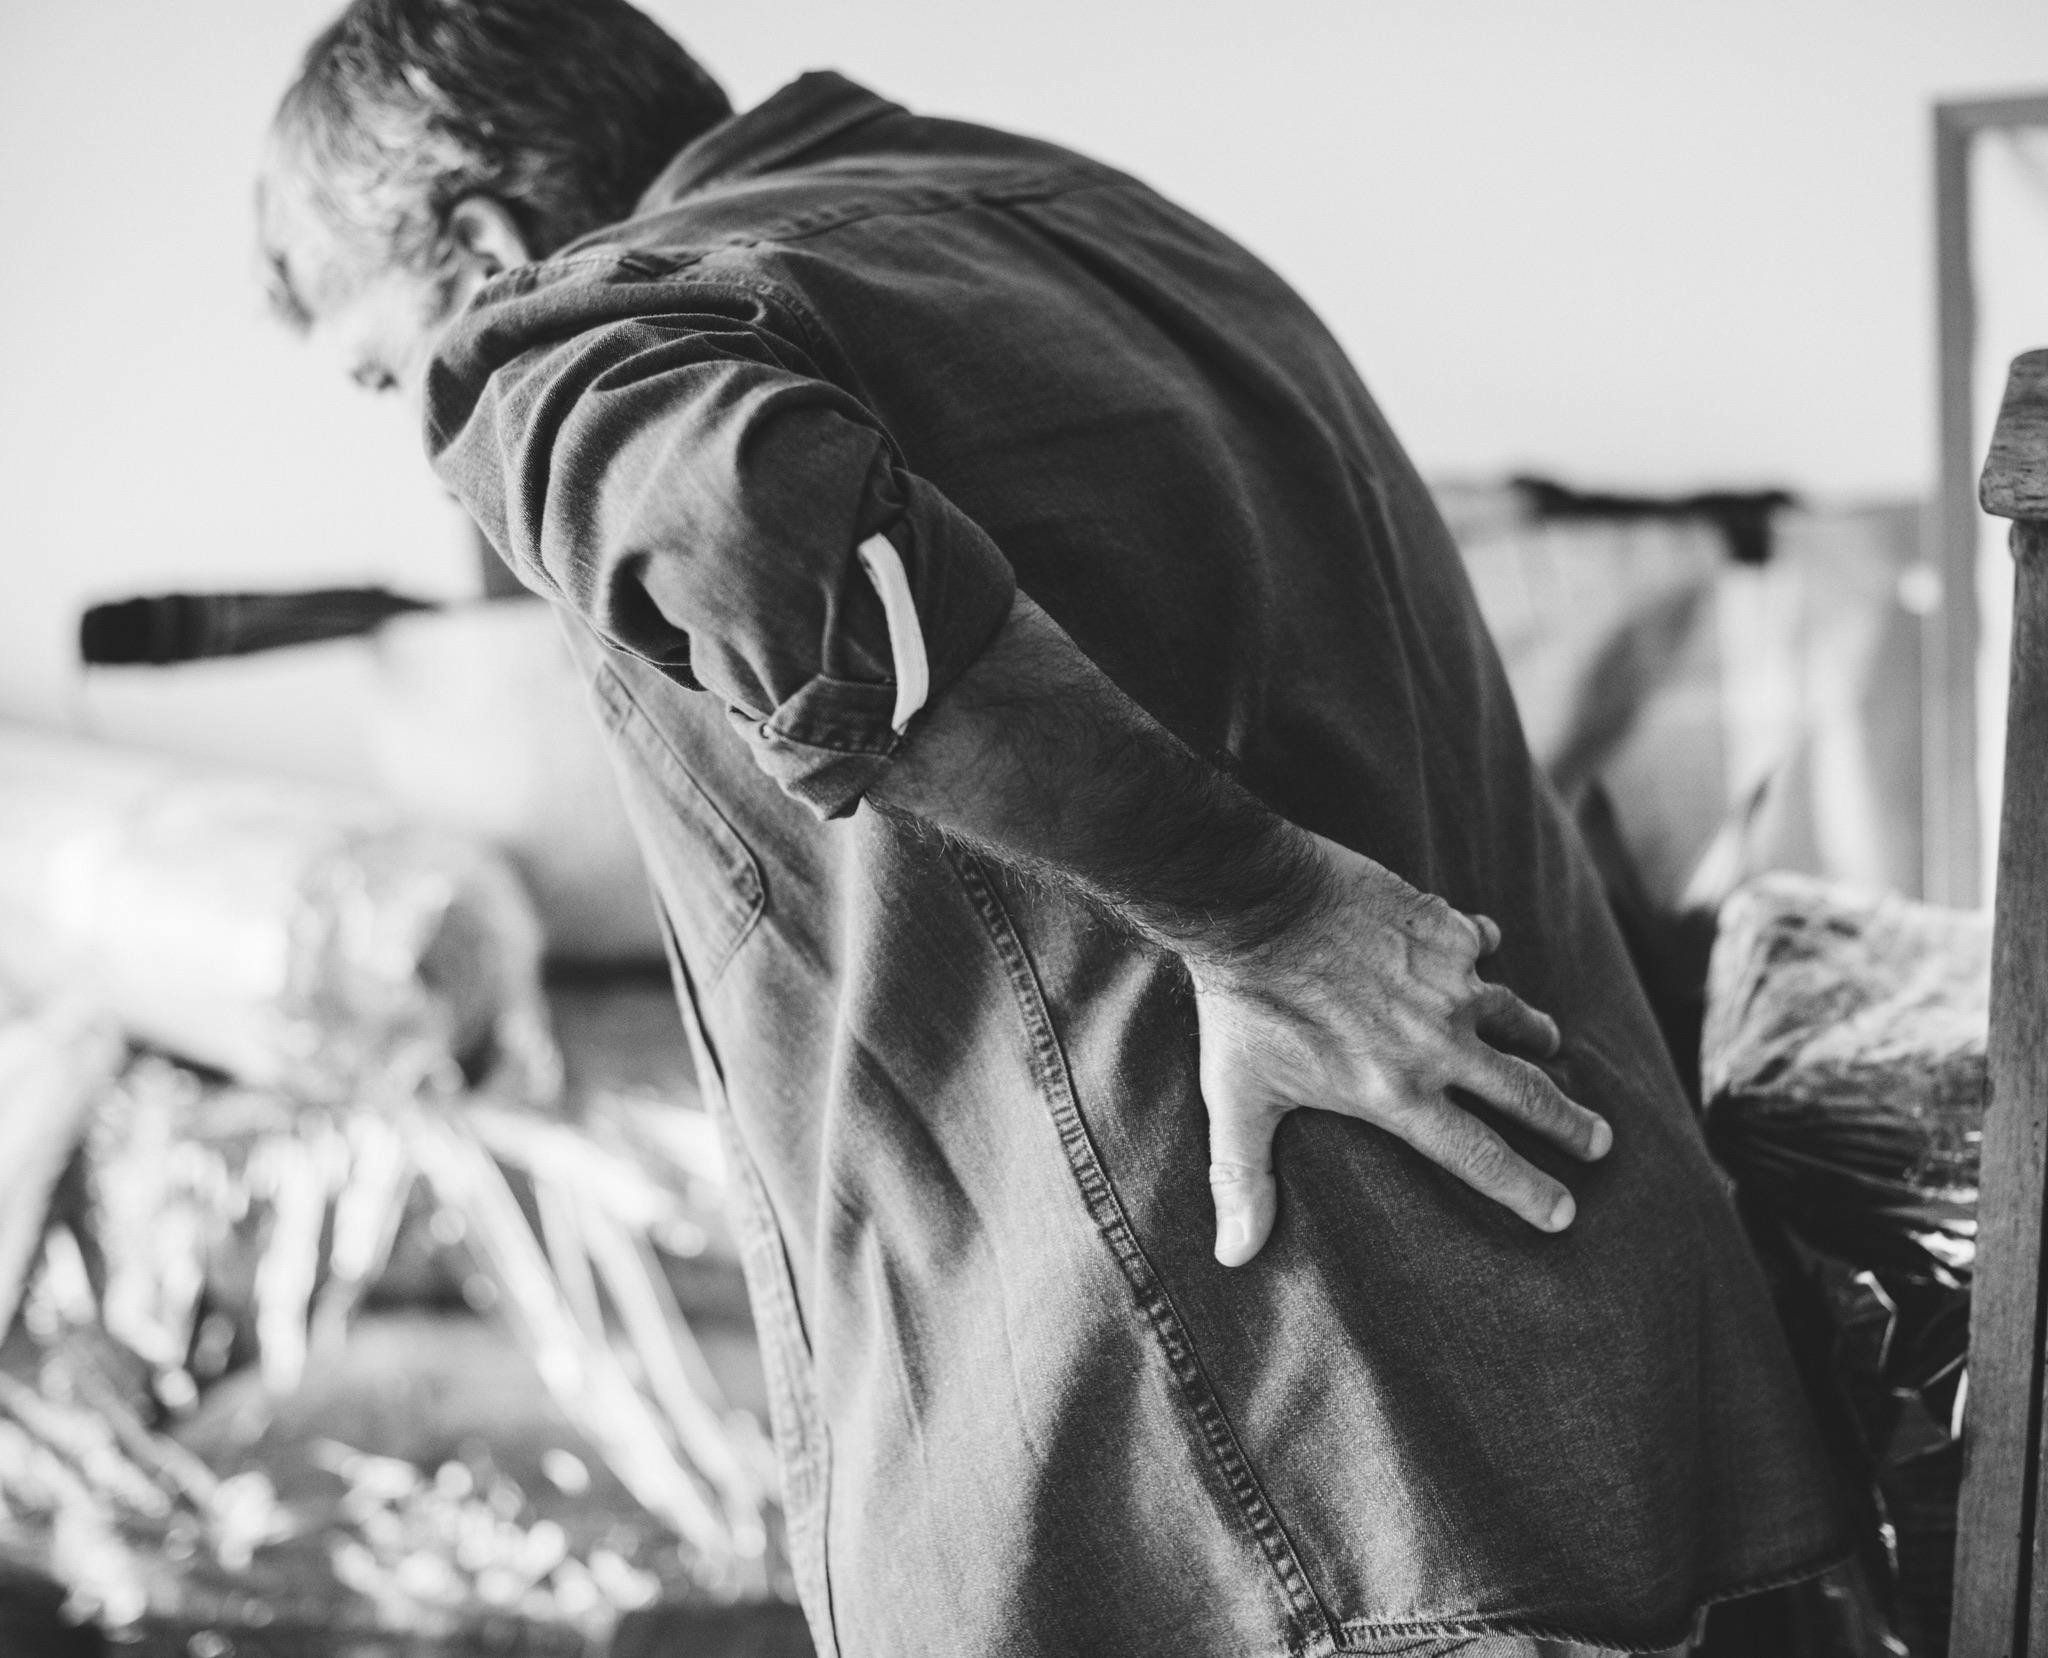 Pain in the Back? Learn how avoid and manage recurring back pain.